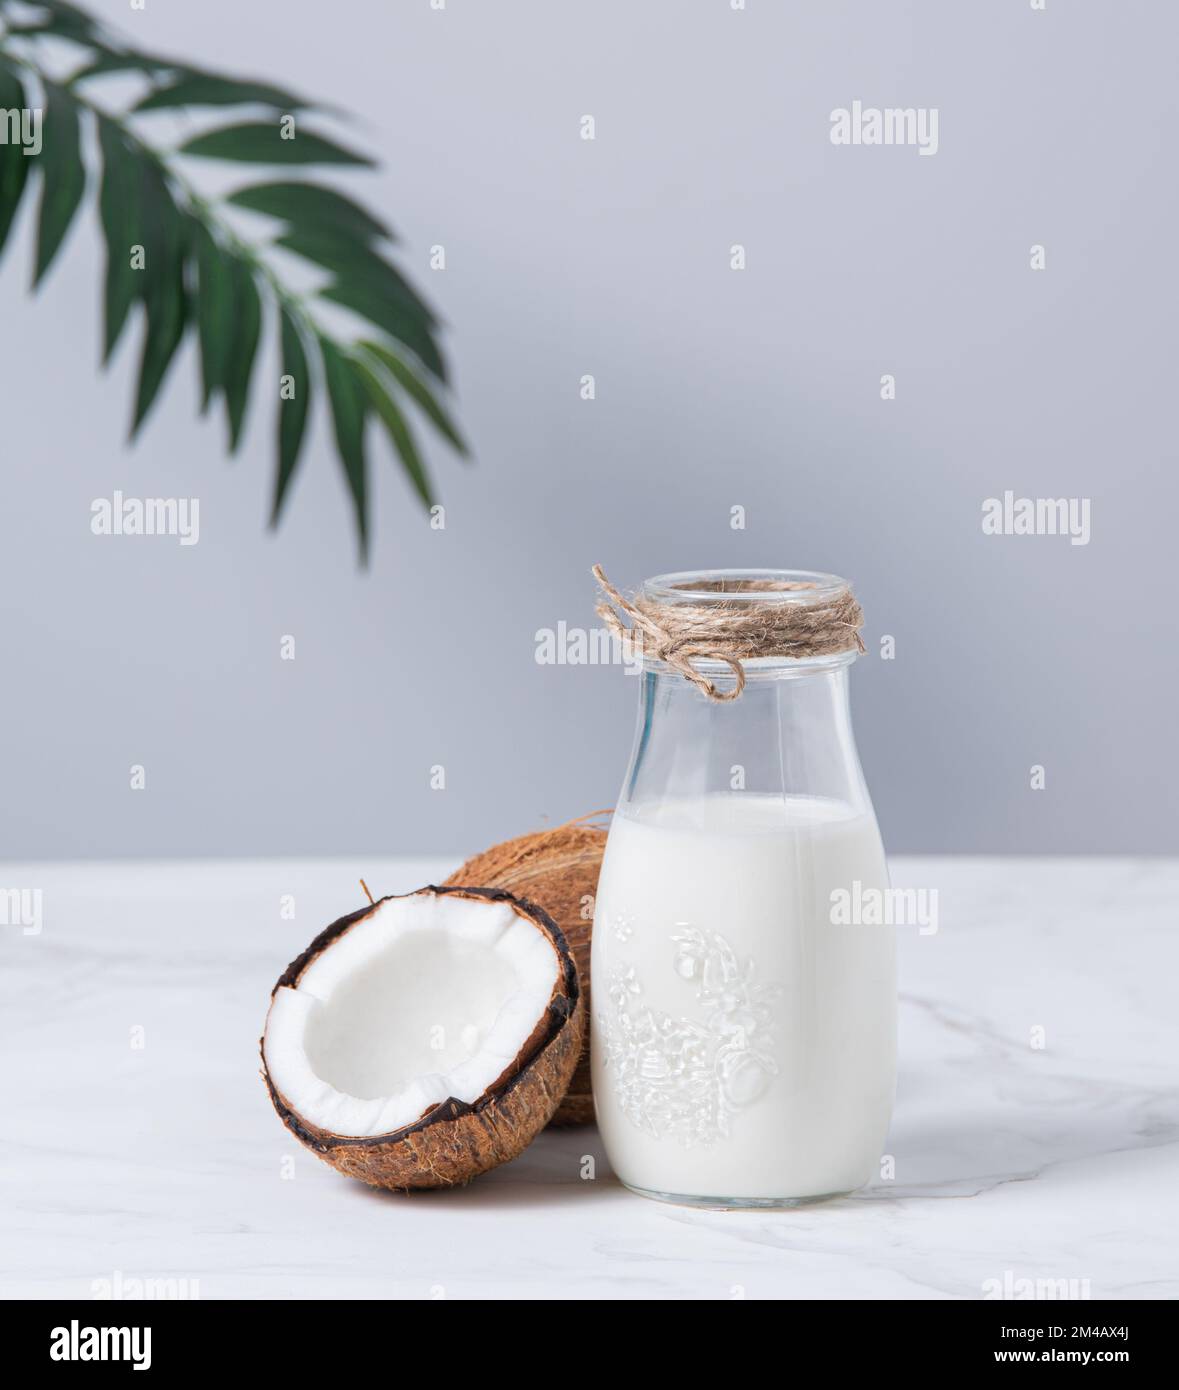 Glass vegan milk bottle on white marble table with half coconuts and palm branch. Front view and copy space image Stock Photo